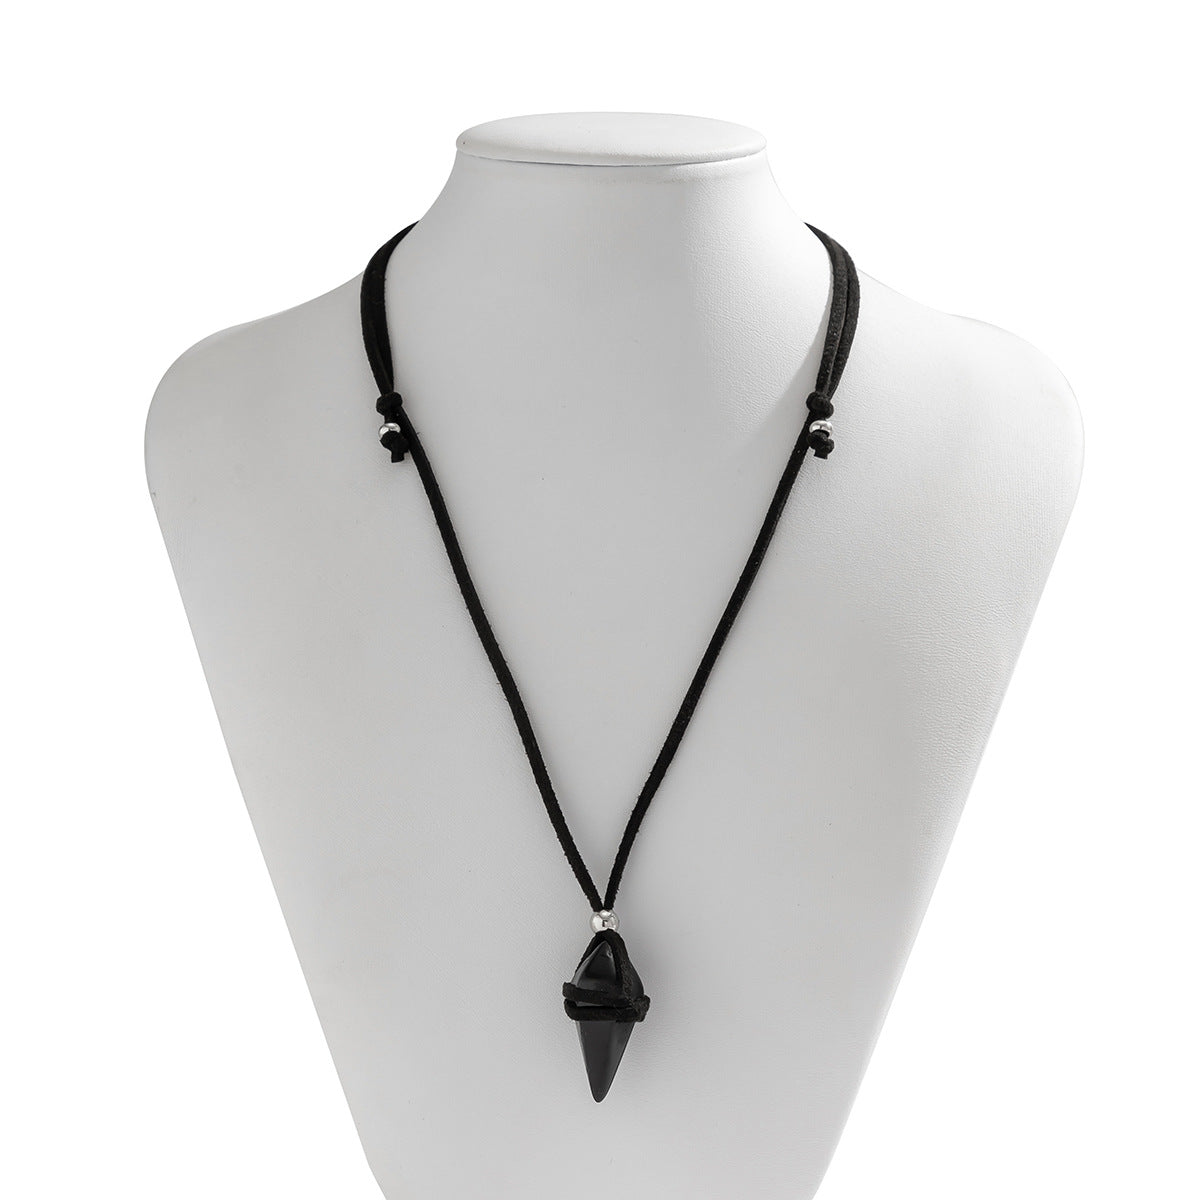 Fashion trend wool chain with crystal hip-hop design necklace - Syble's